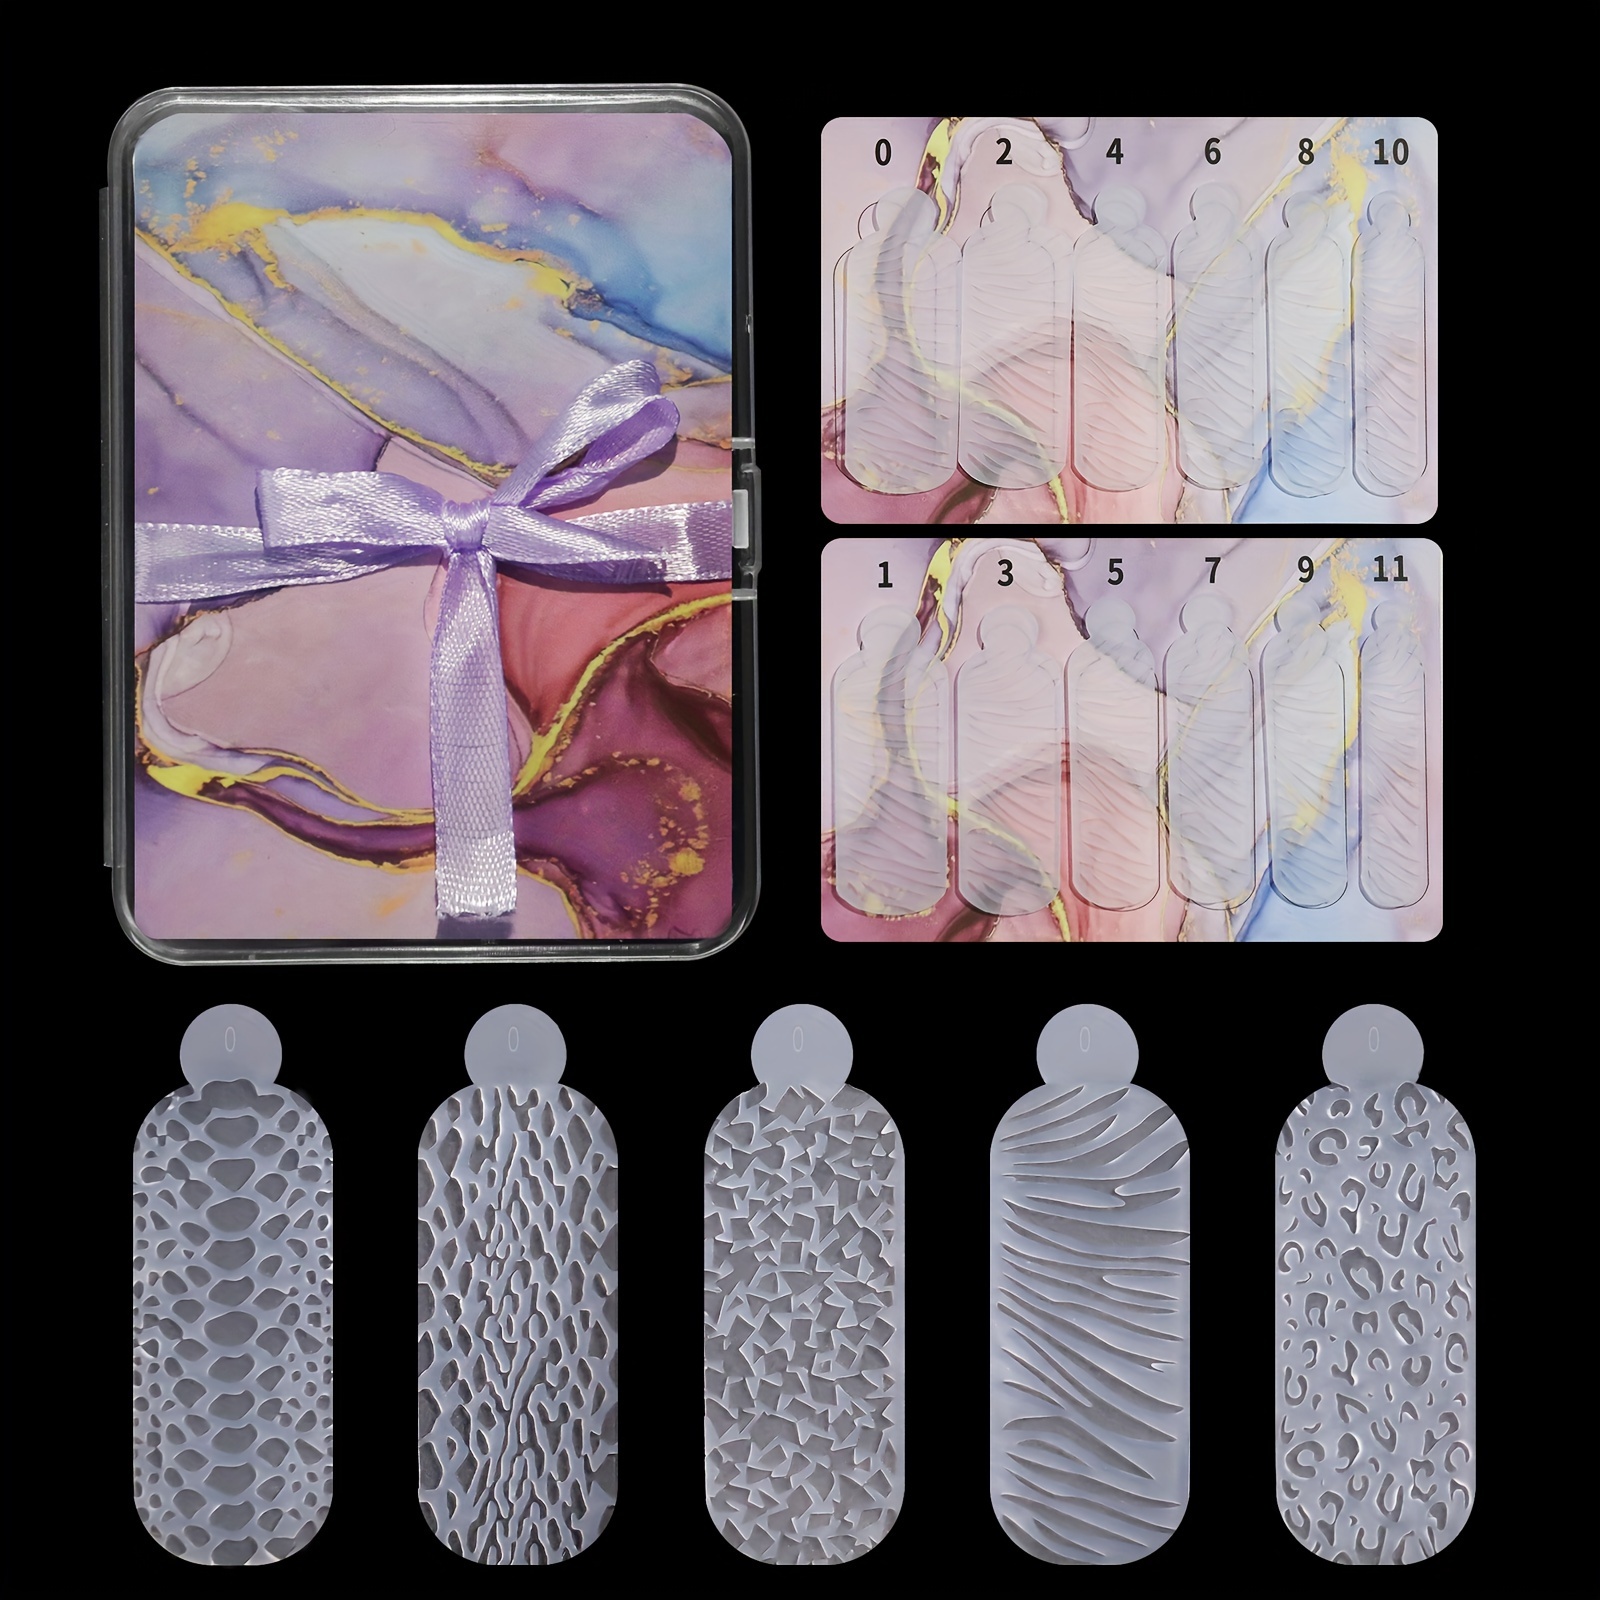 

60pcs 3d Silicone Stamping Molds For Nail Art, Reusable Double-sided Embossed Nail Mold Set, Touchable Silicone Molds For Creating Raised Designs On Nails, Universal Nail Art Tools